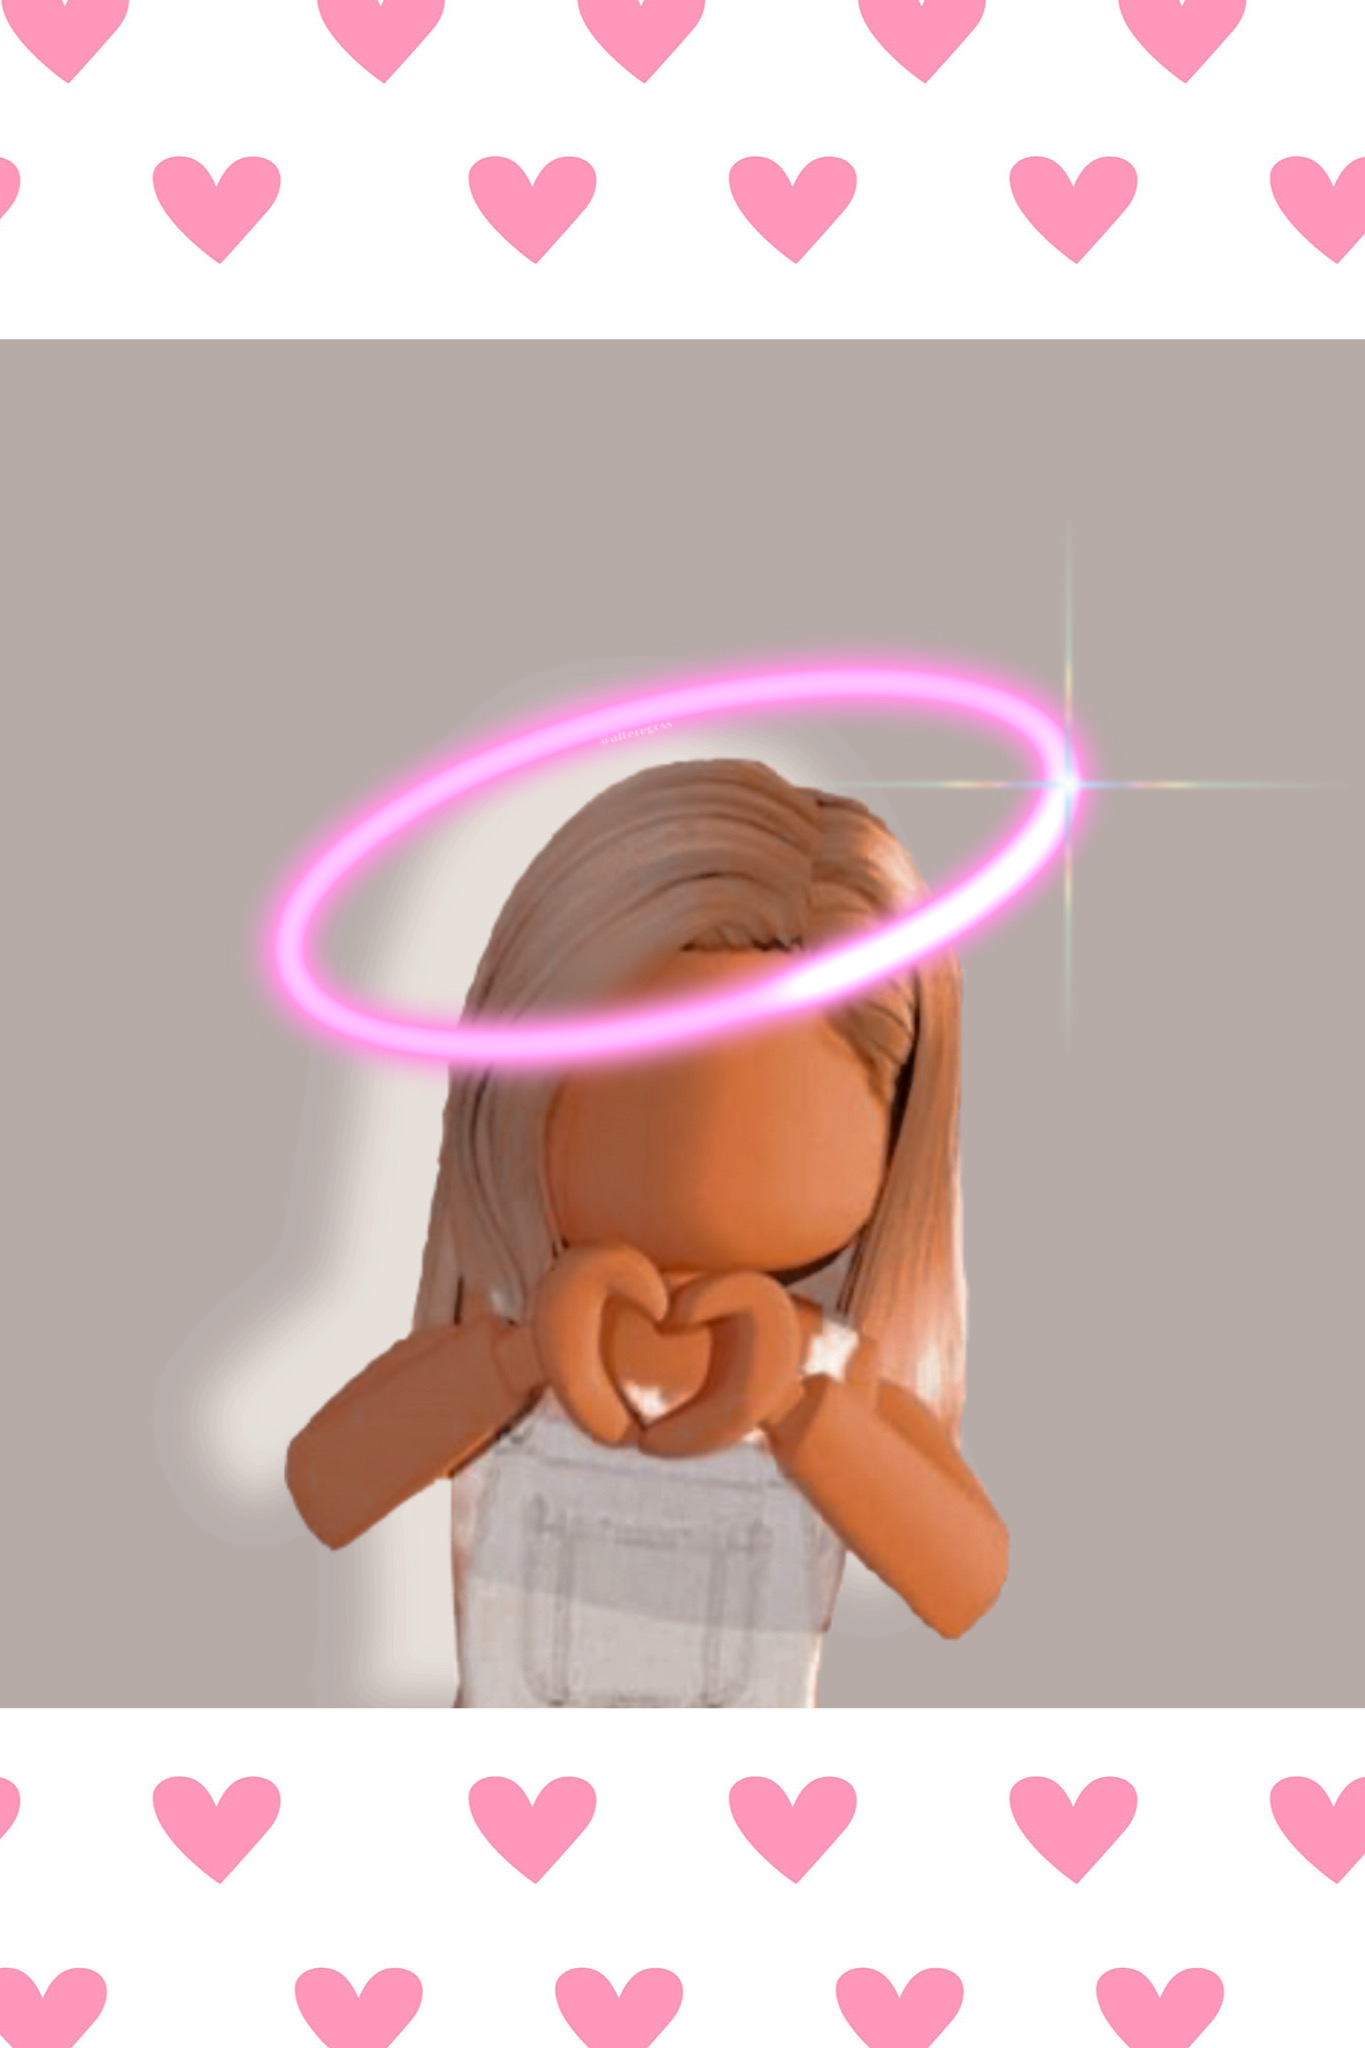 Hearts Roblox Image By Stell Quin10 - heart stickers roblox